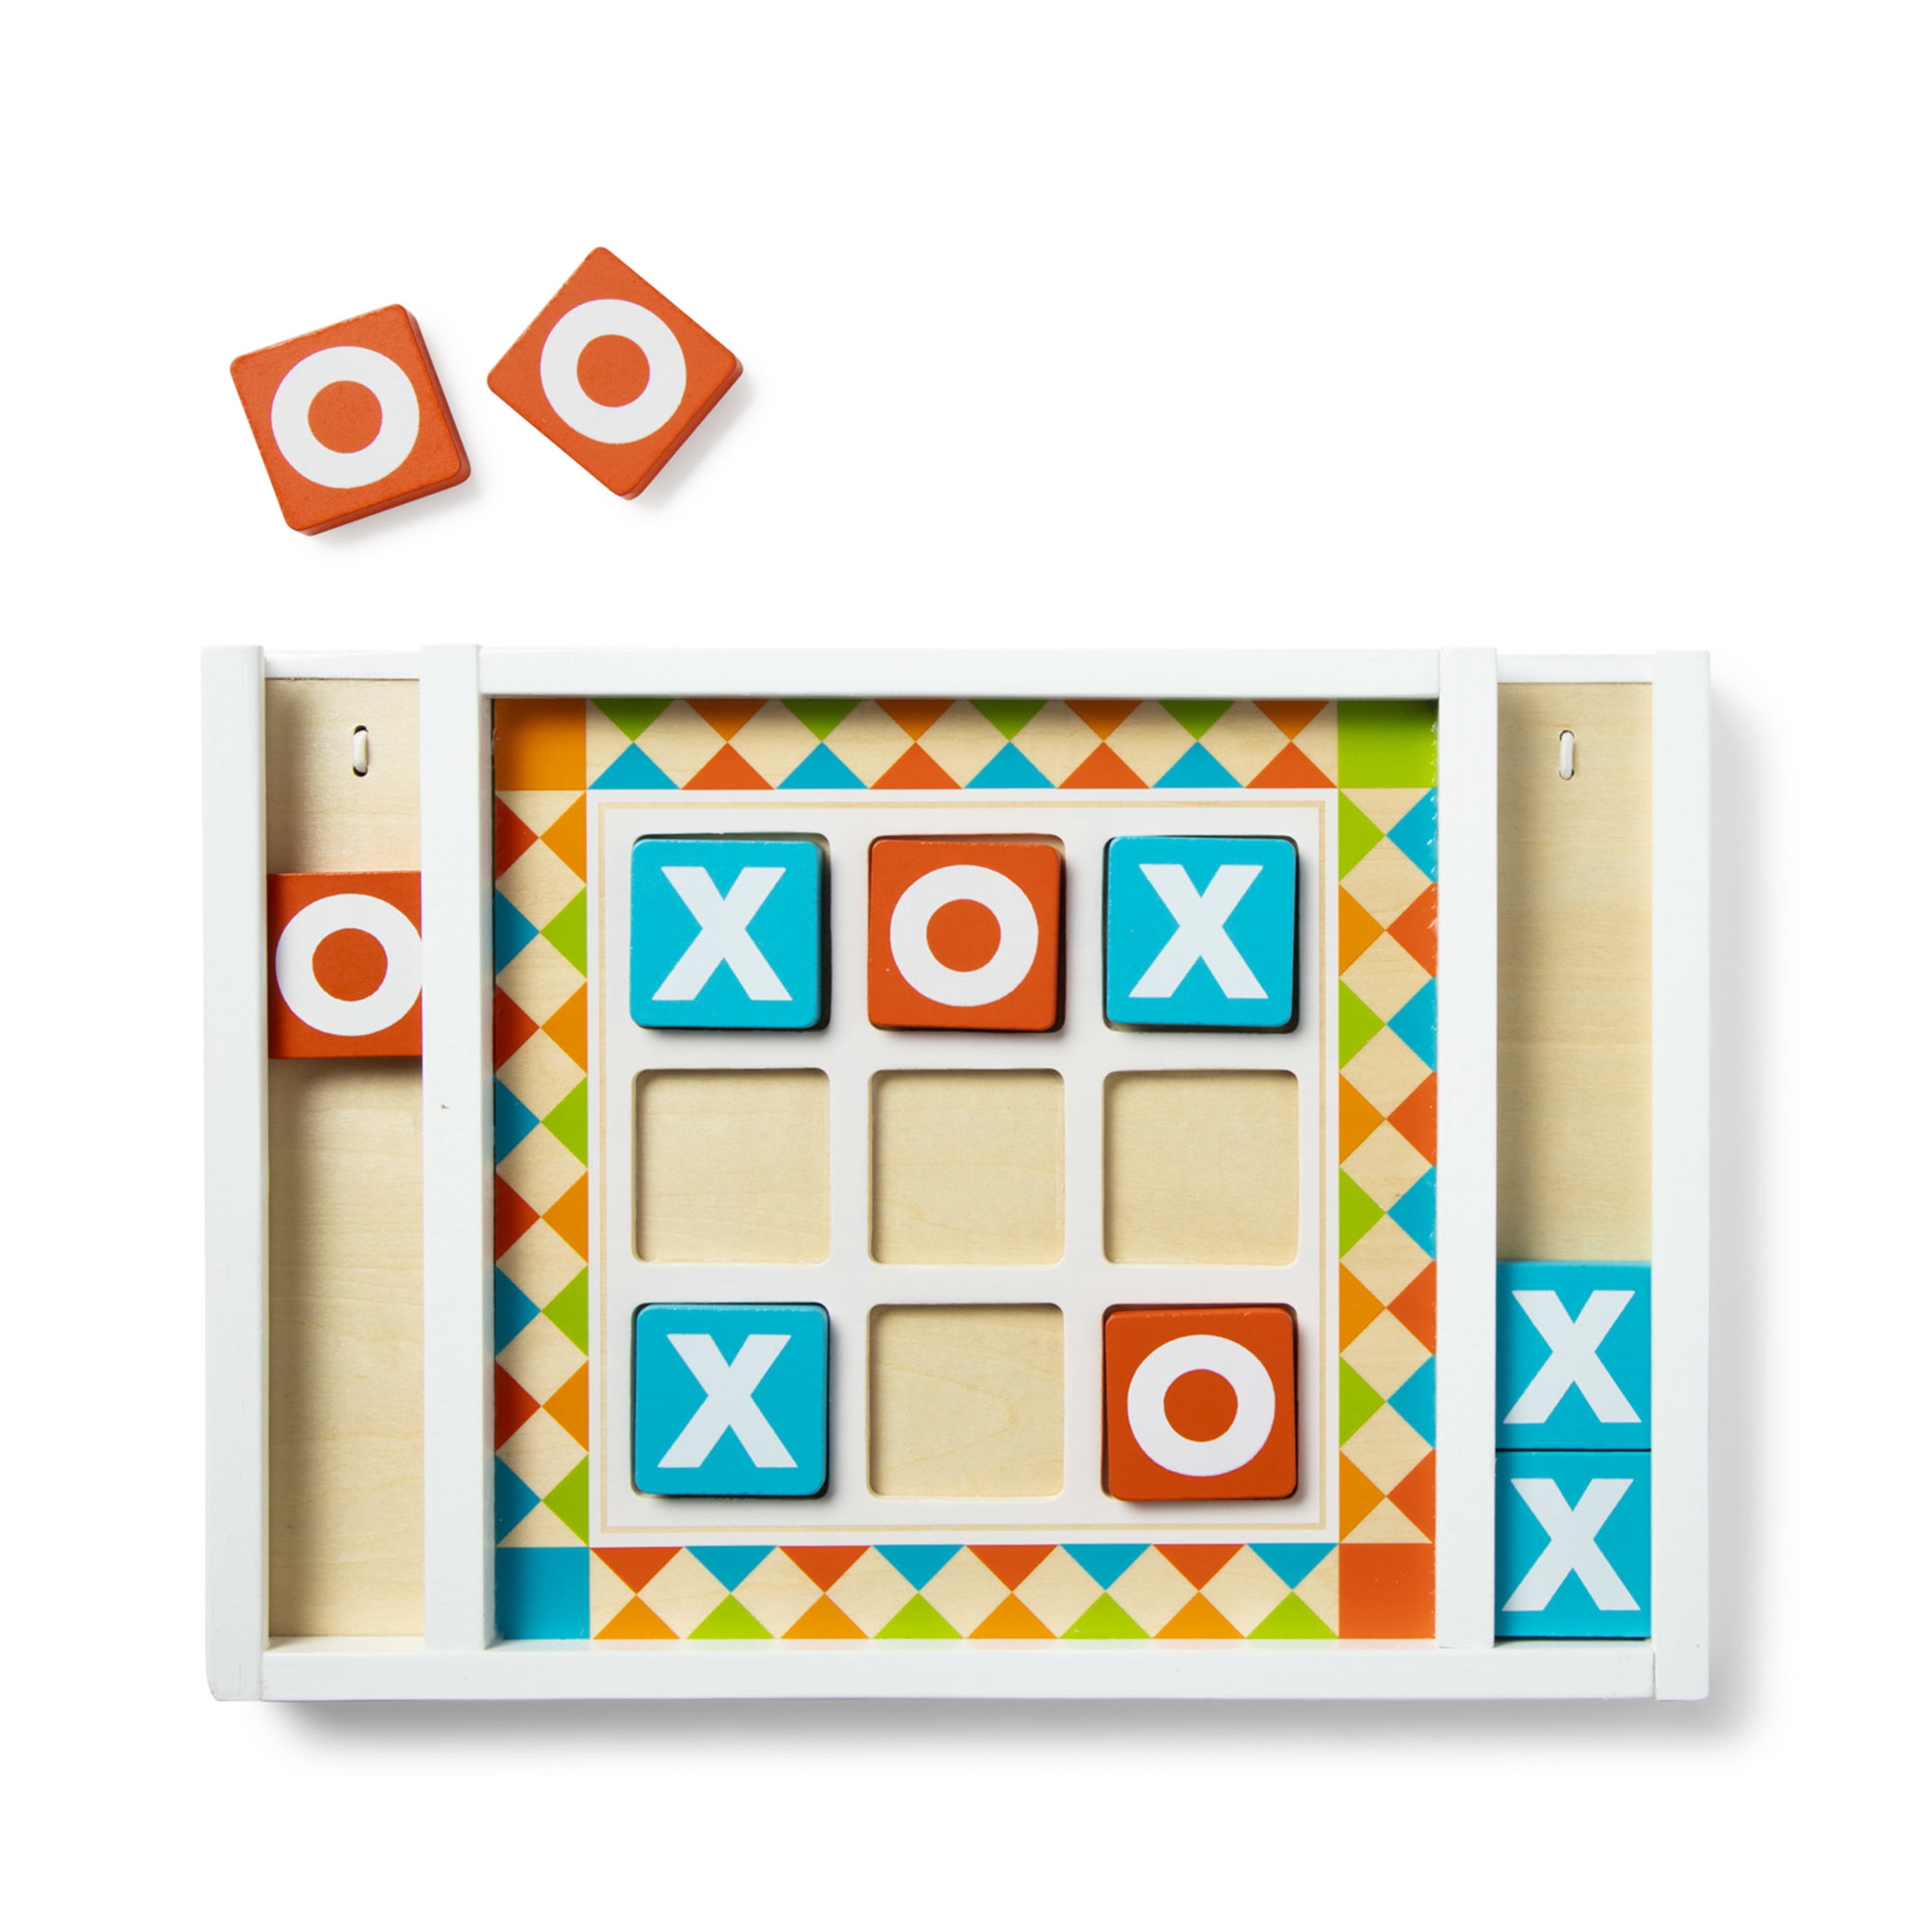 Melissa & Doug Wooden Tic-Tac-Toe Board Game with 10 Self-Storing Wooden  Game Pieces (12.5” W x 8.5” L x 1.25” D)